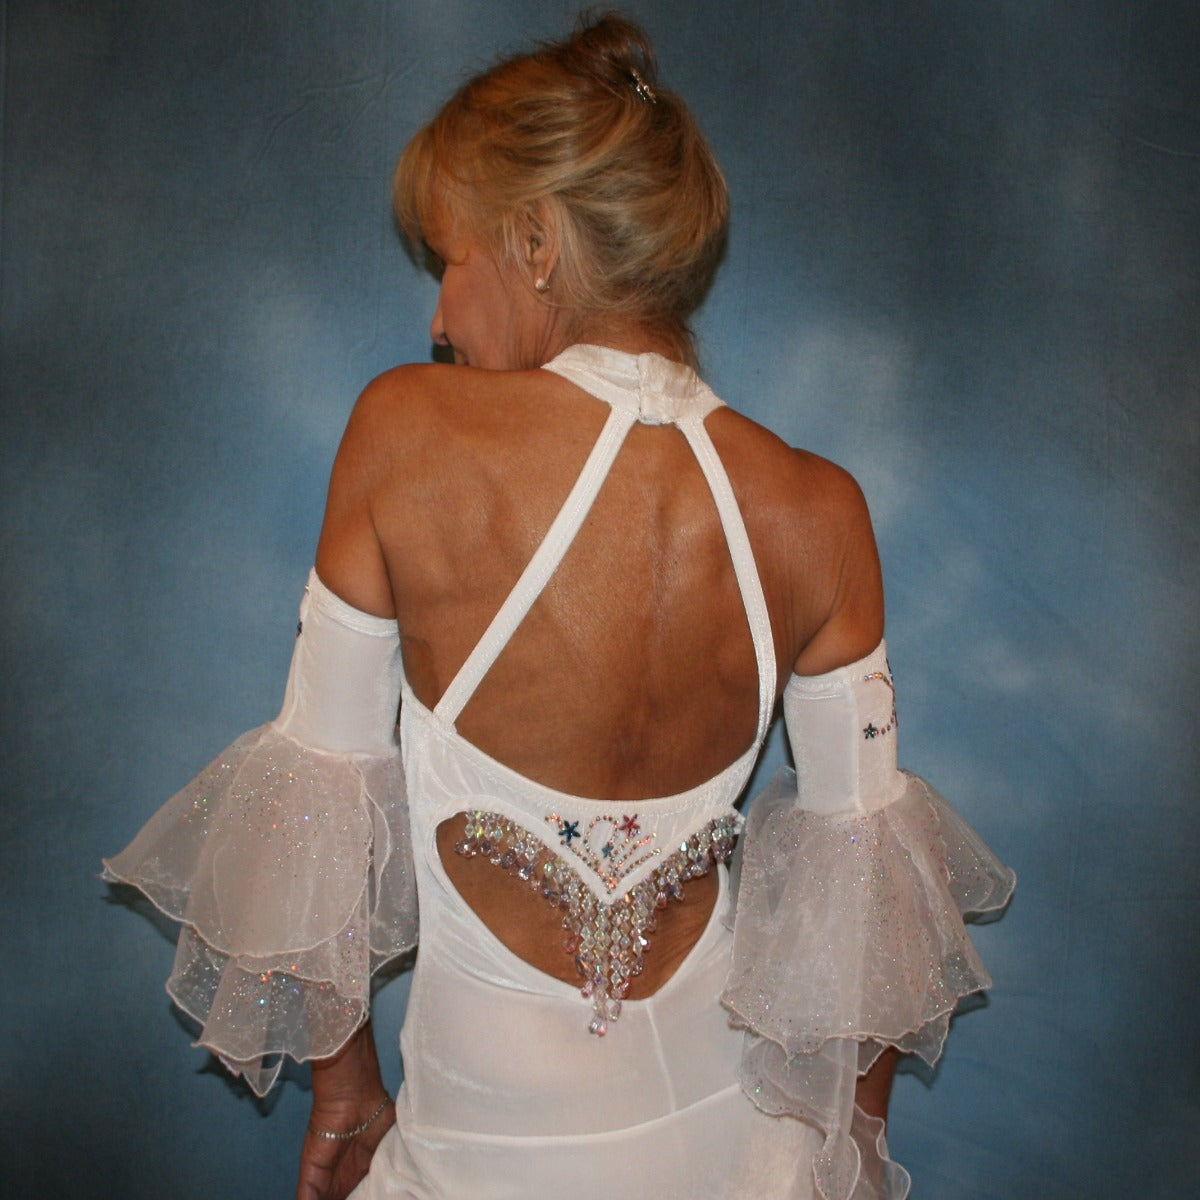 Crystal's Creations close back view of White Latin/rhythm dress created in luxurious stretch velvet, features fancy organza flounces with delicate pink & blue bubble pearlized flocking, embellished with Swarovski rhinestone work, plus hand beading.